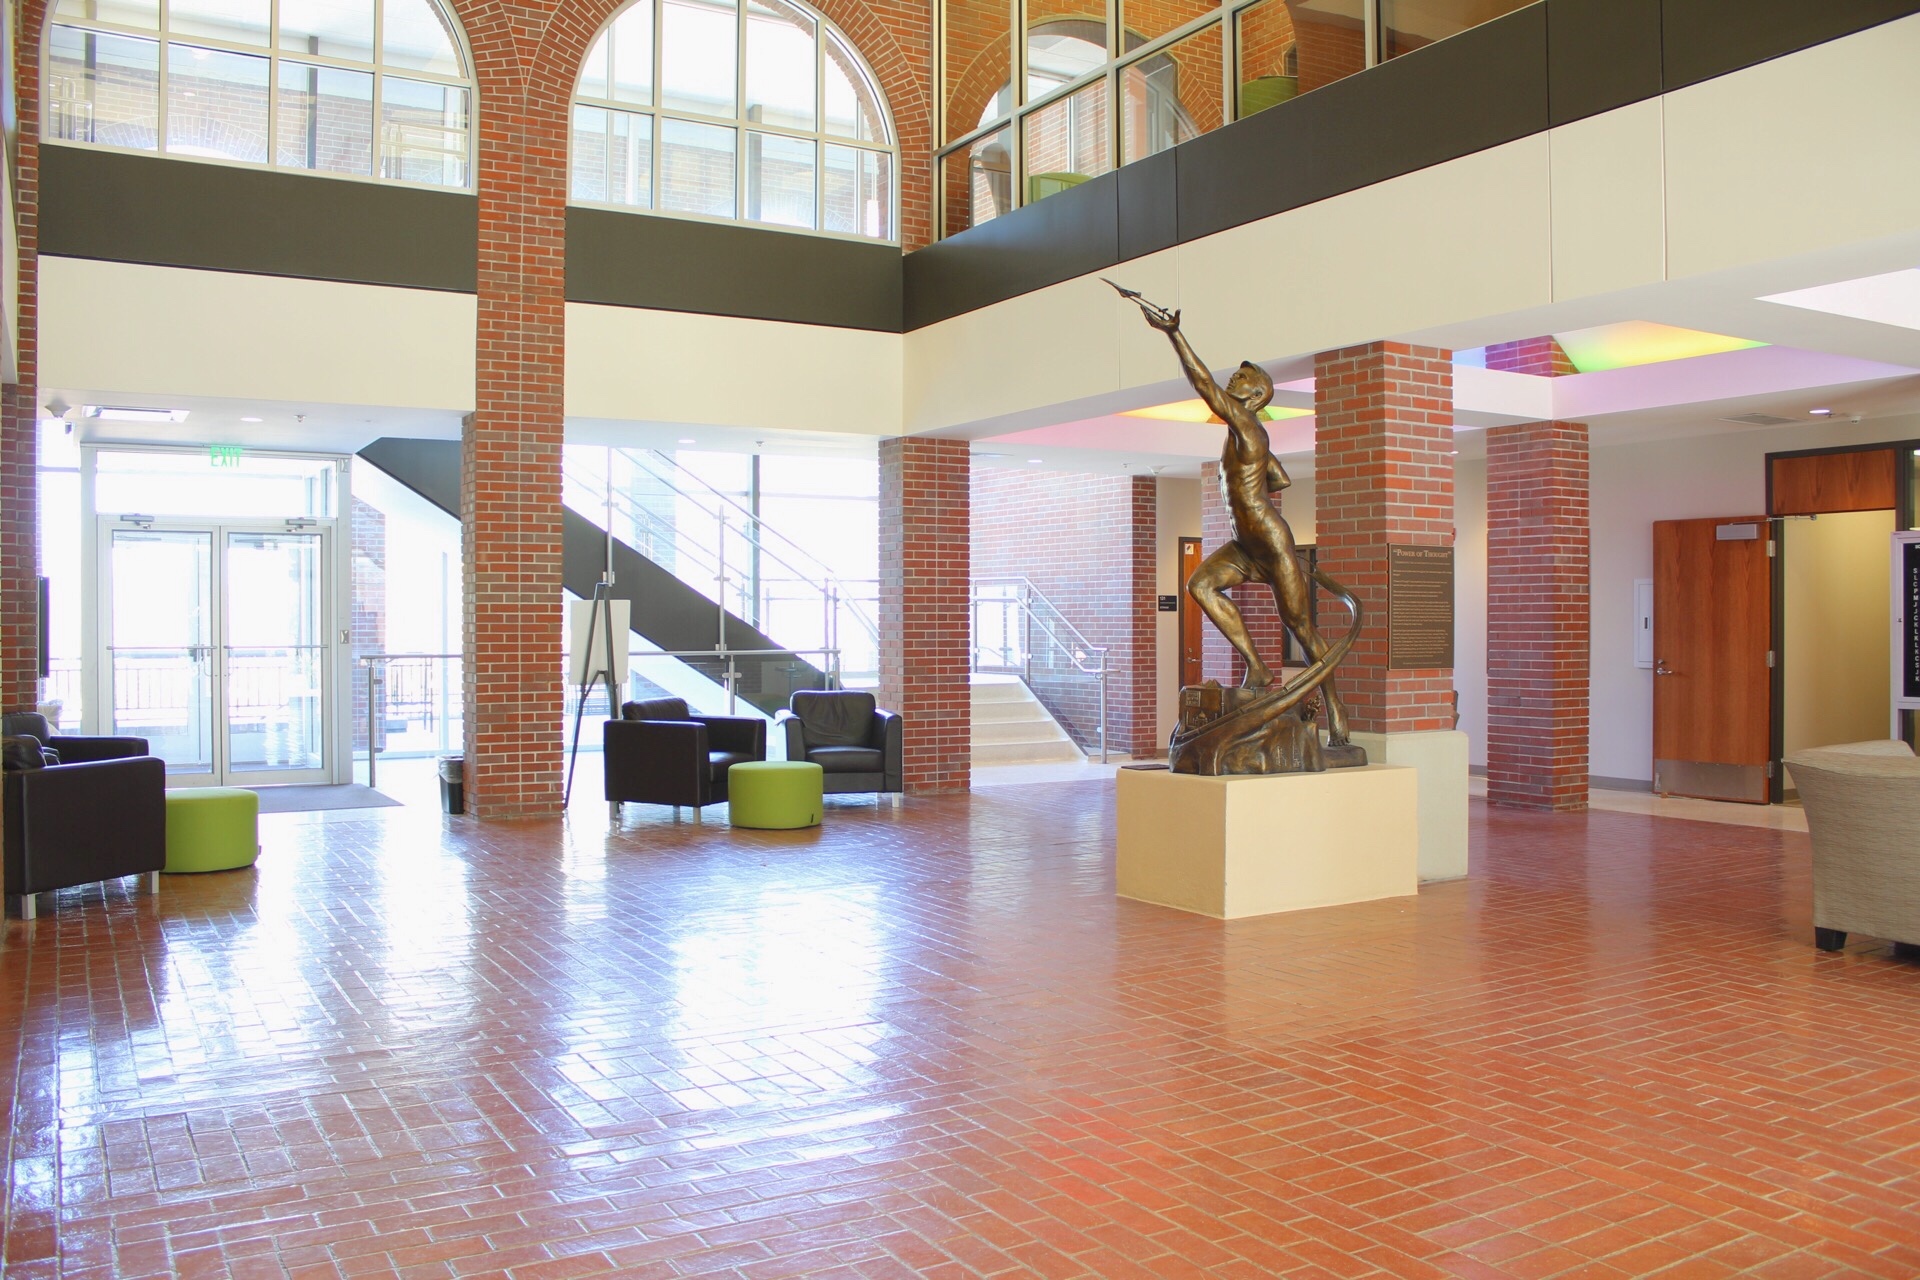 Jindra lobby showing brick floor, brick pillars, The Power of Thought Statue, seating areas and stairs to second floor.